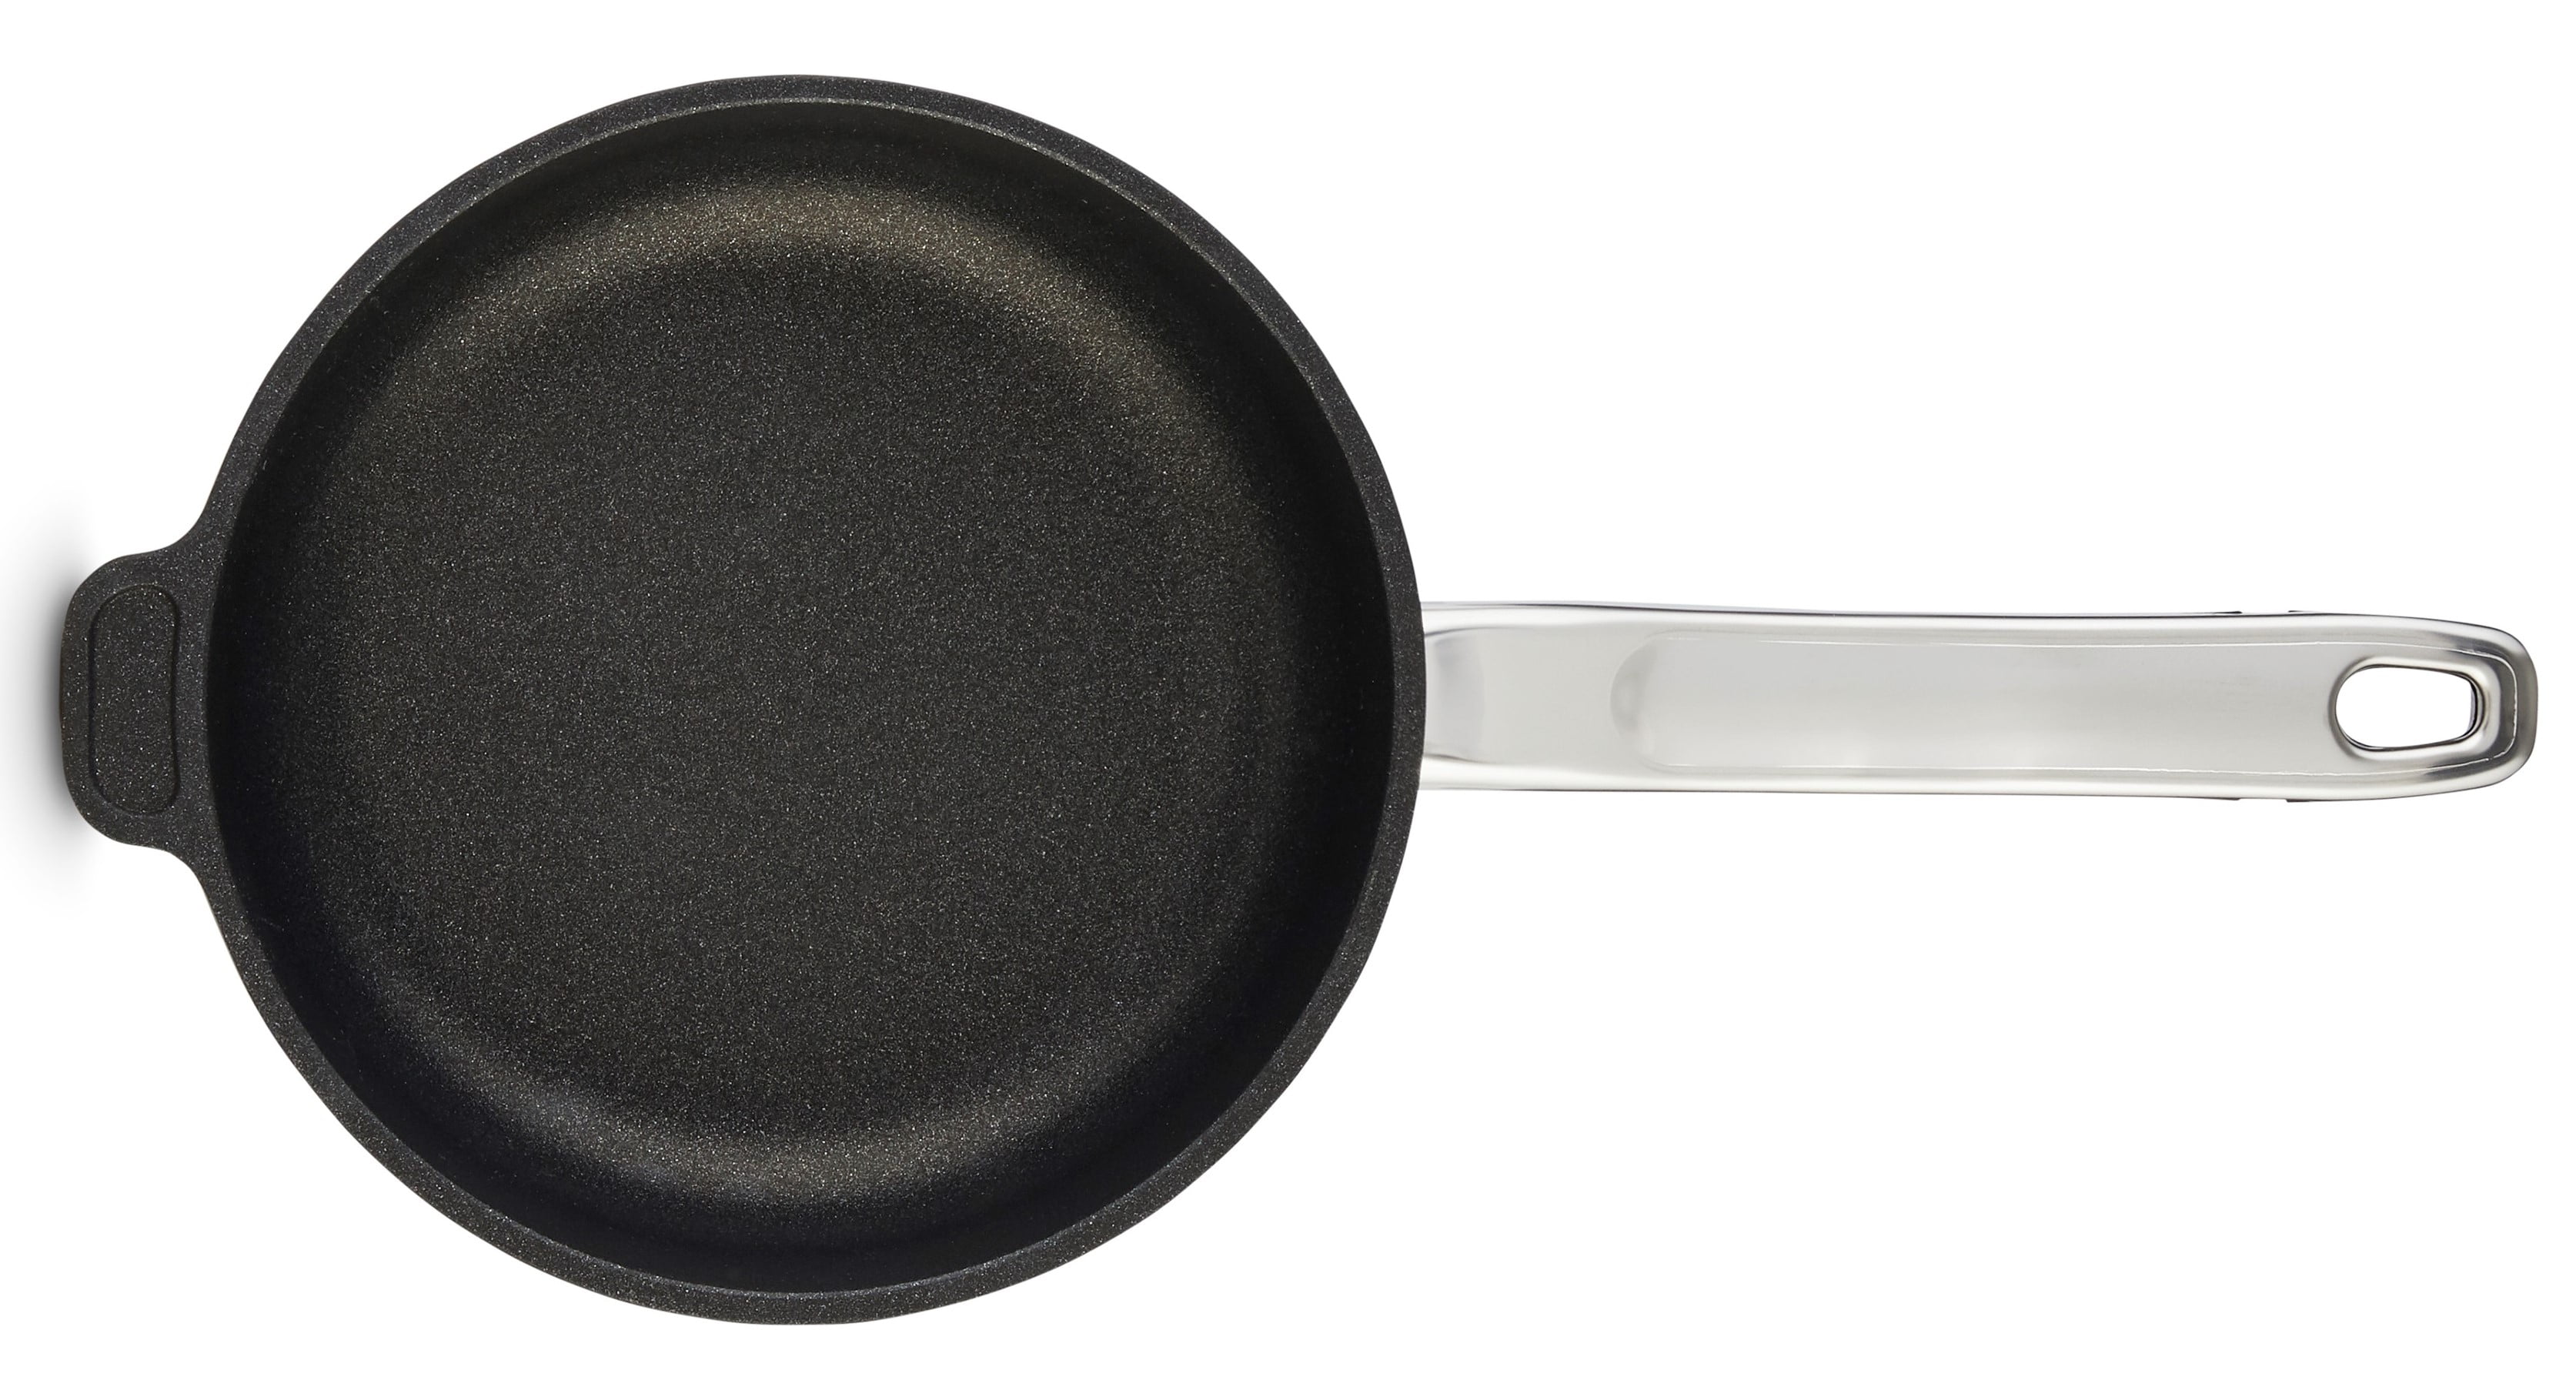 Ozeri 8 Stainless Steel Earth Pan by with Eterna, A 100% PFOA and APEO-Free Non-Stick Coating, Bronze